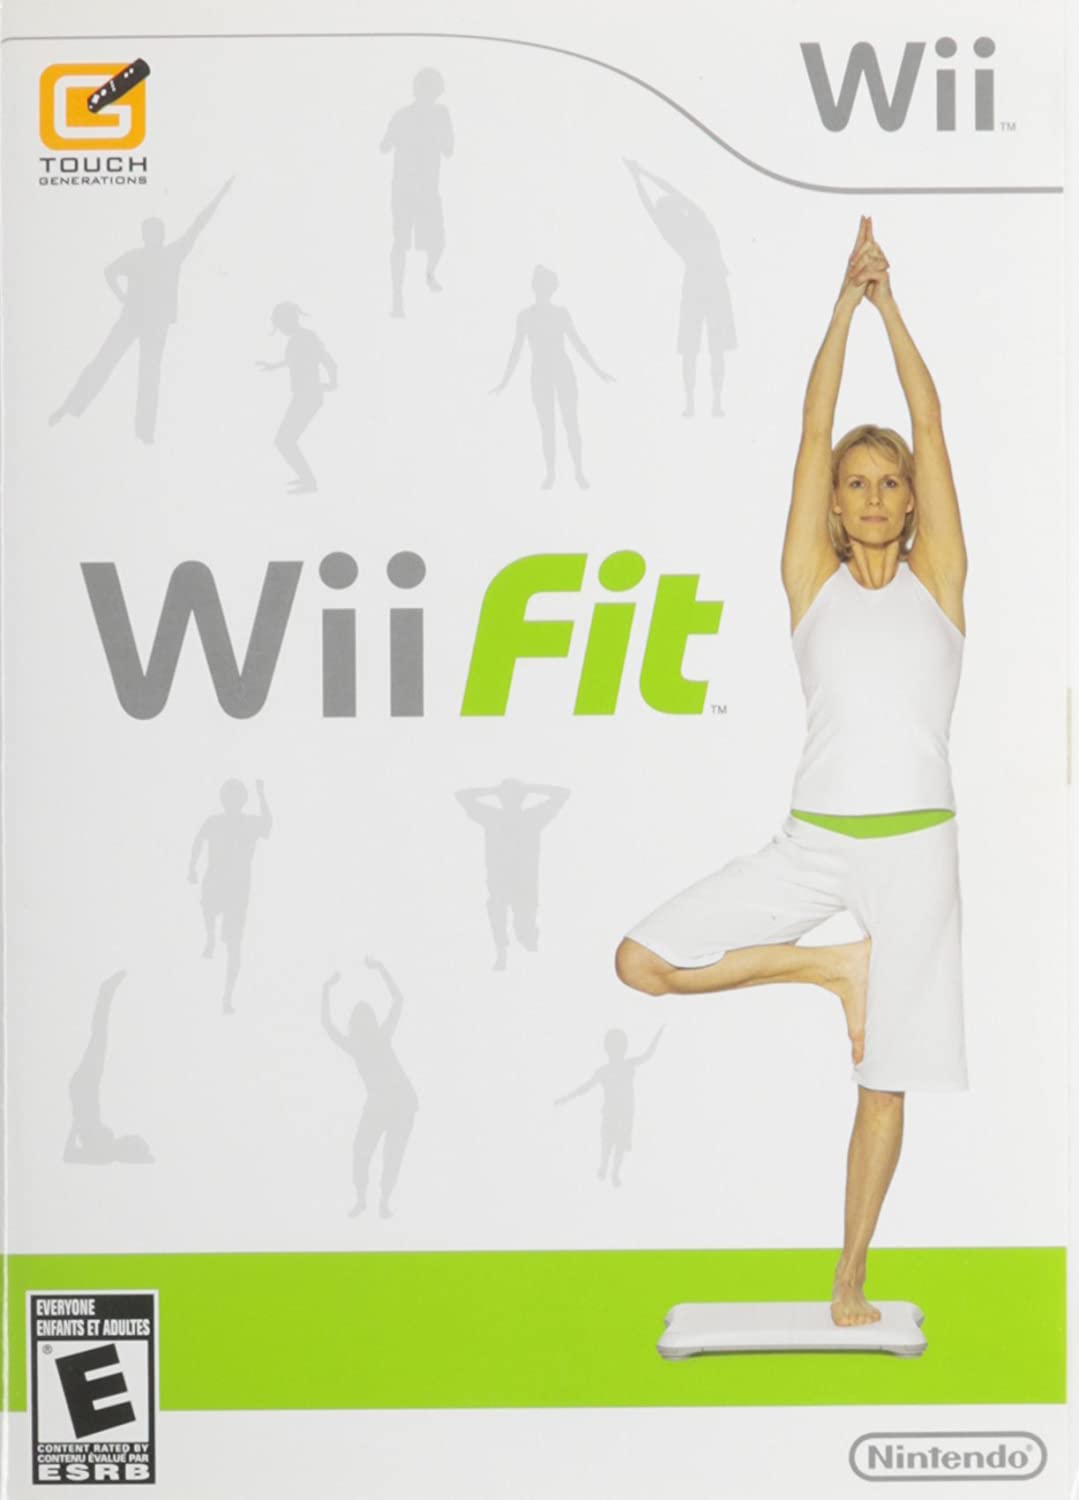 WiiFit  WiiFit is the original fitness game that motivates players to get up and moving towards a healthier lifestyle. Try your hand at yoga, strength training, aerobics and balance games, all from the comfort of your own living room!